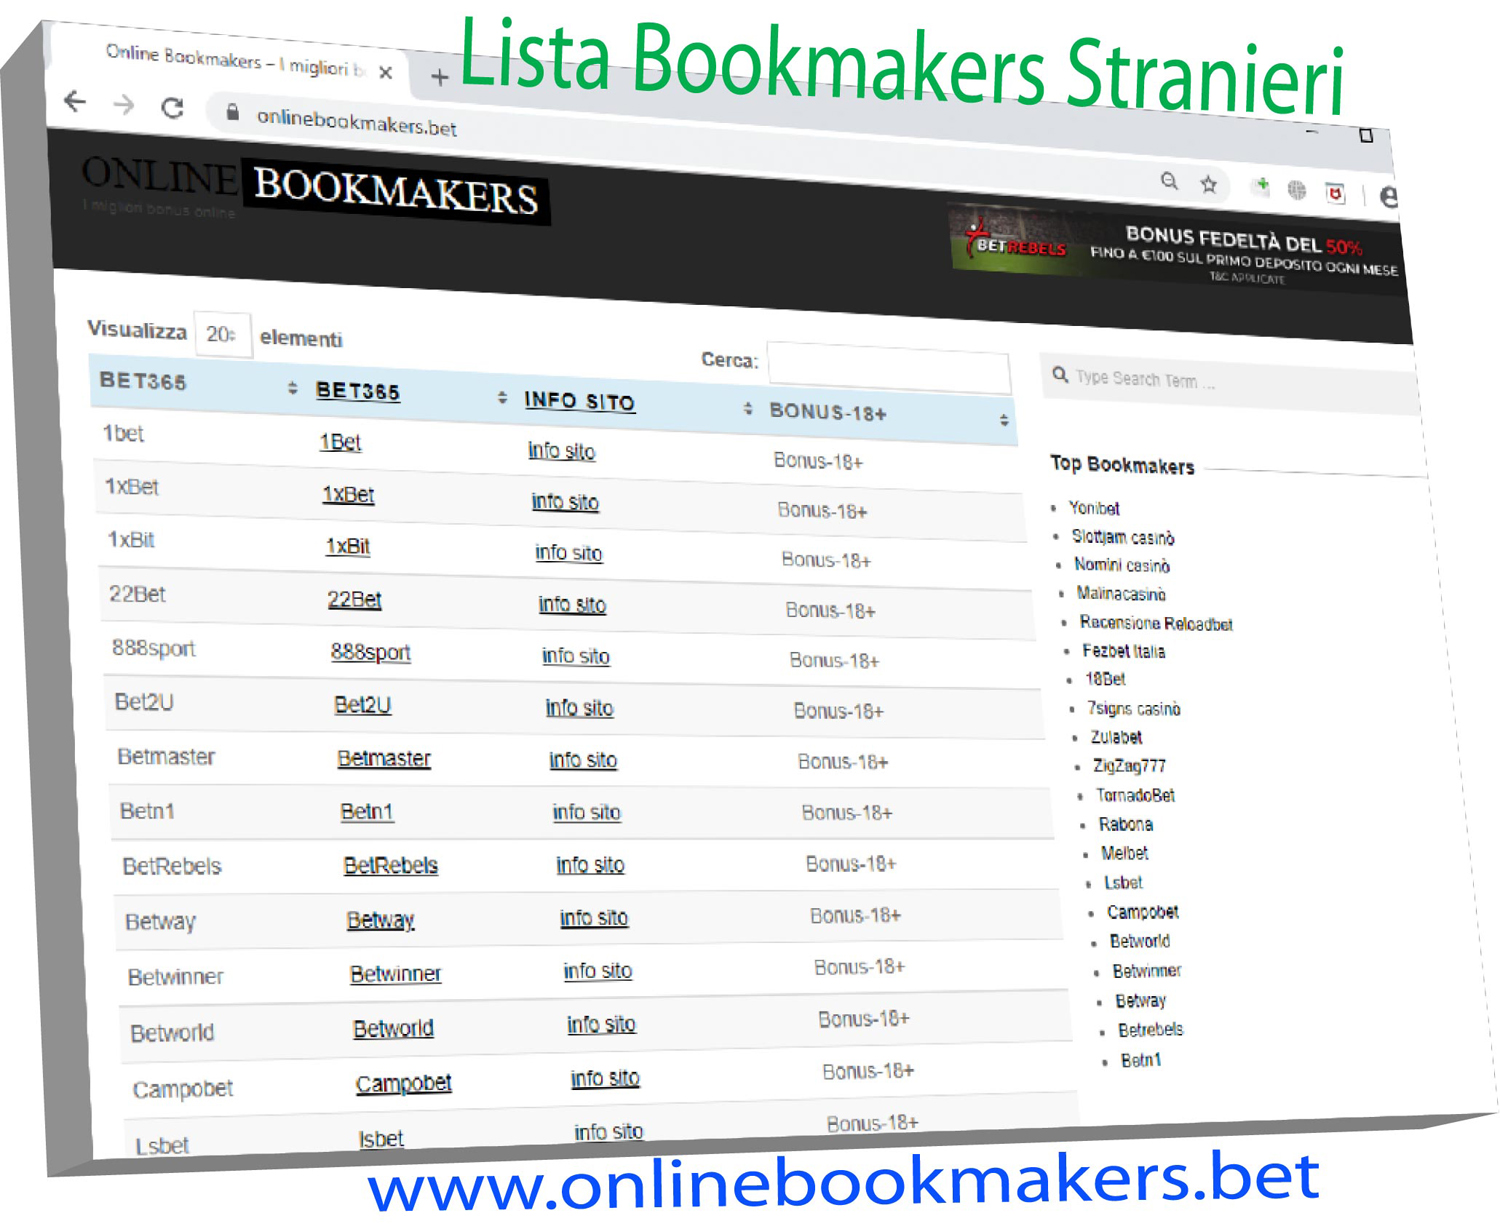 Where to Get a Foreign Bookmakers List